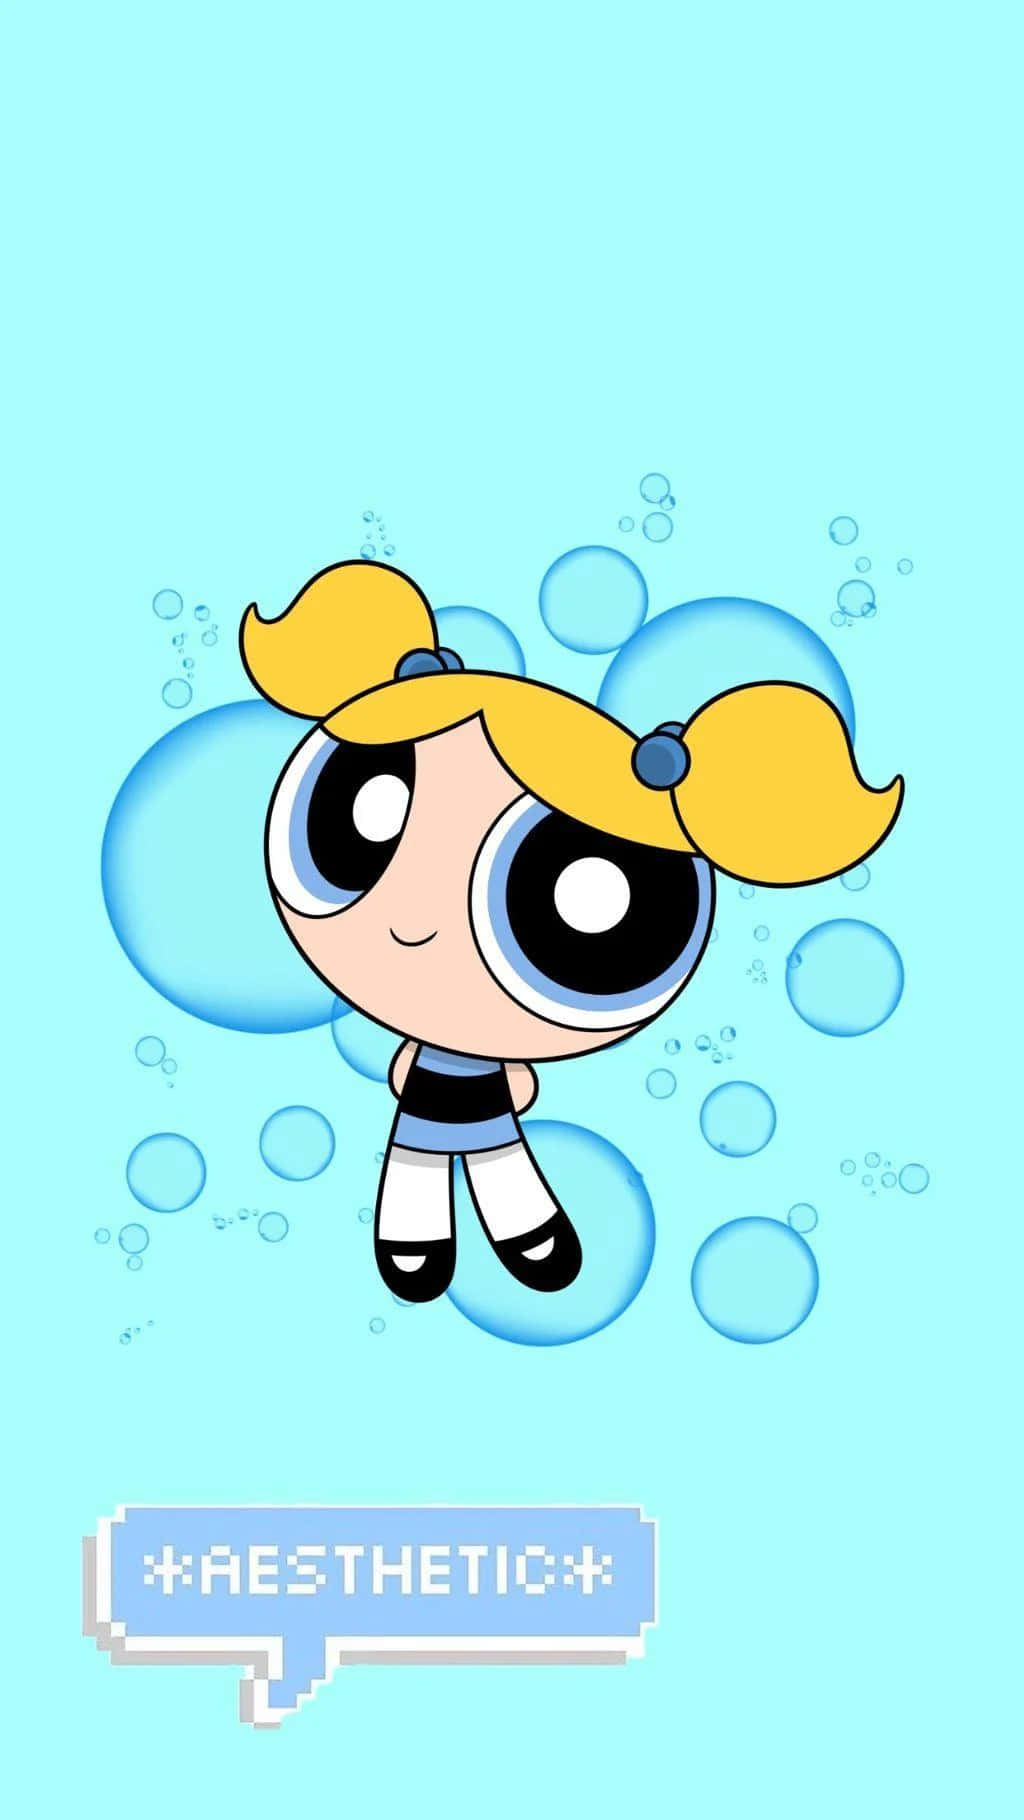 Aesthetic Cartoon Character Bubbles Background Wallpaper